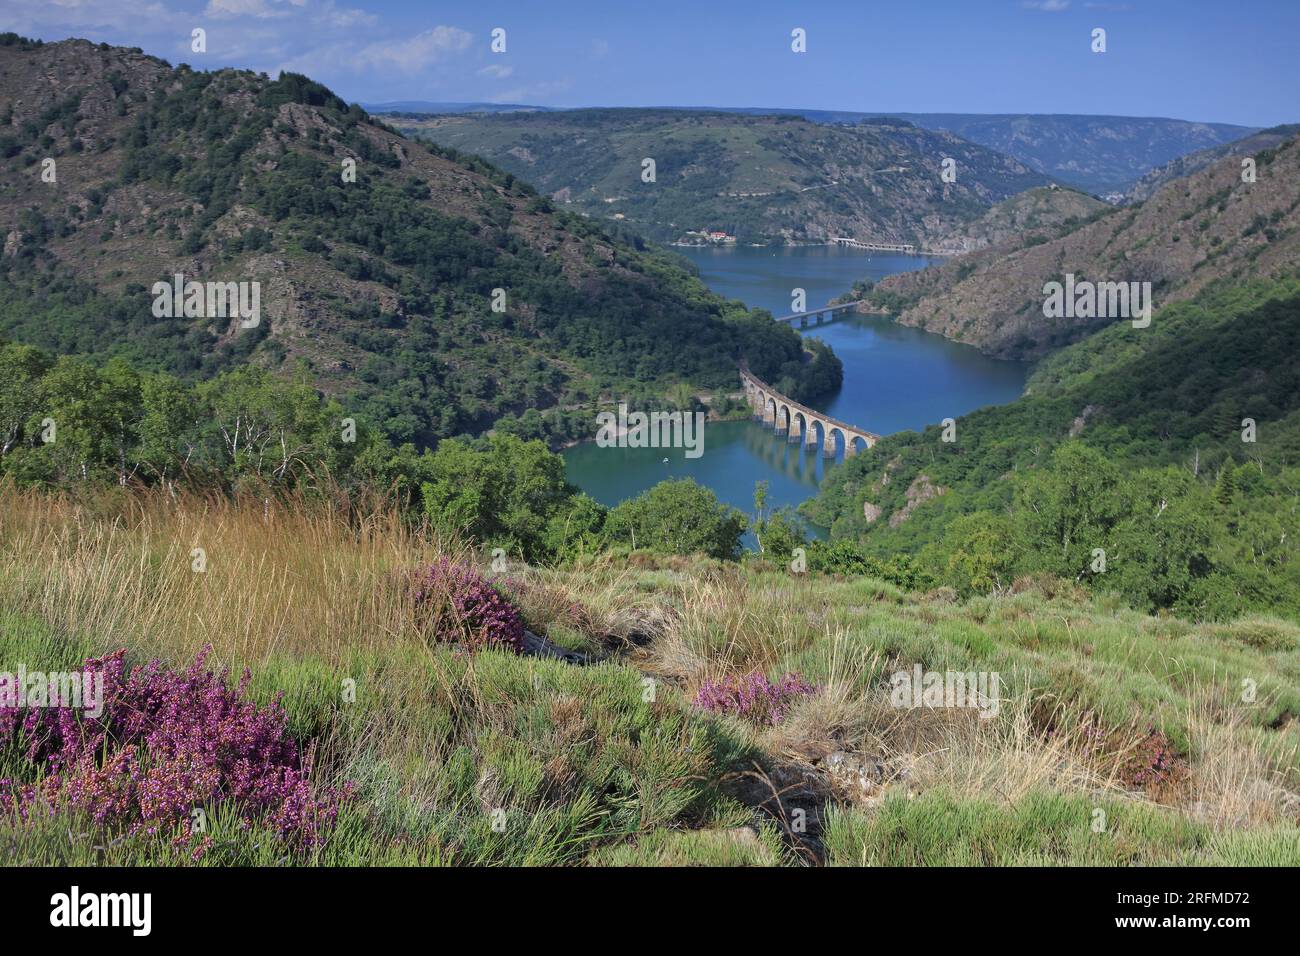 France, Lozère, Villefort, the lake, hydraulic reservoir, Altier viaduct (railway bridge), view from the surrounding mountain Stock Photo